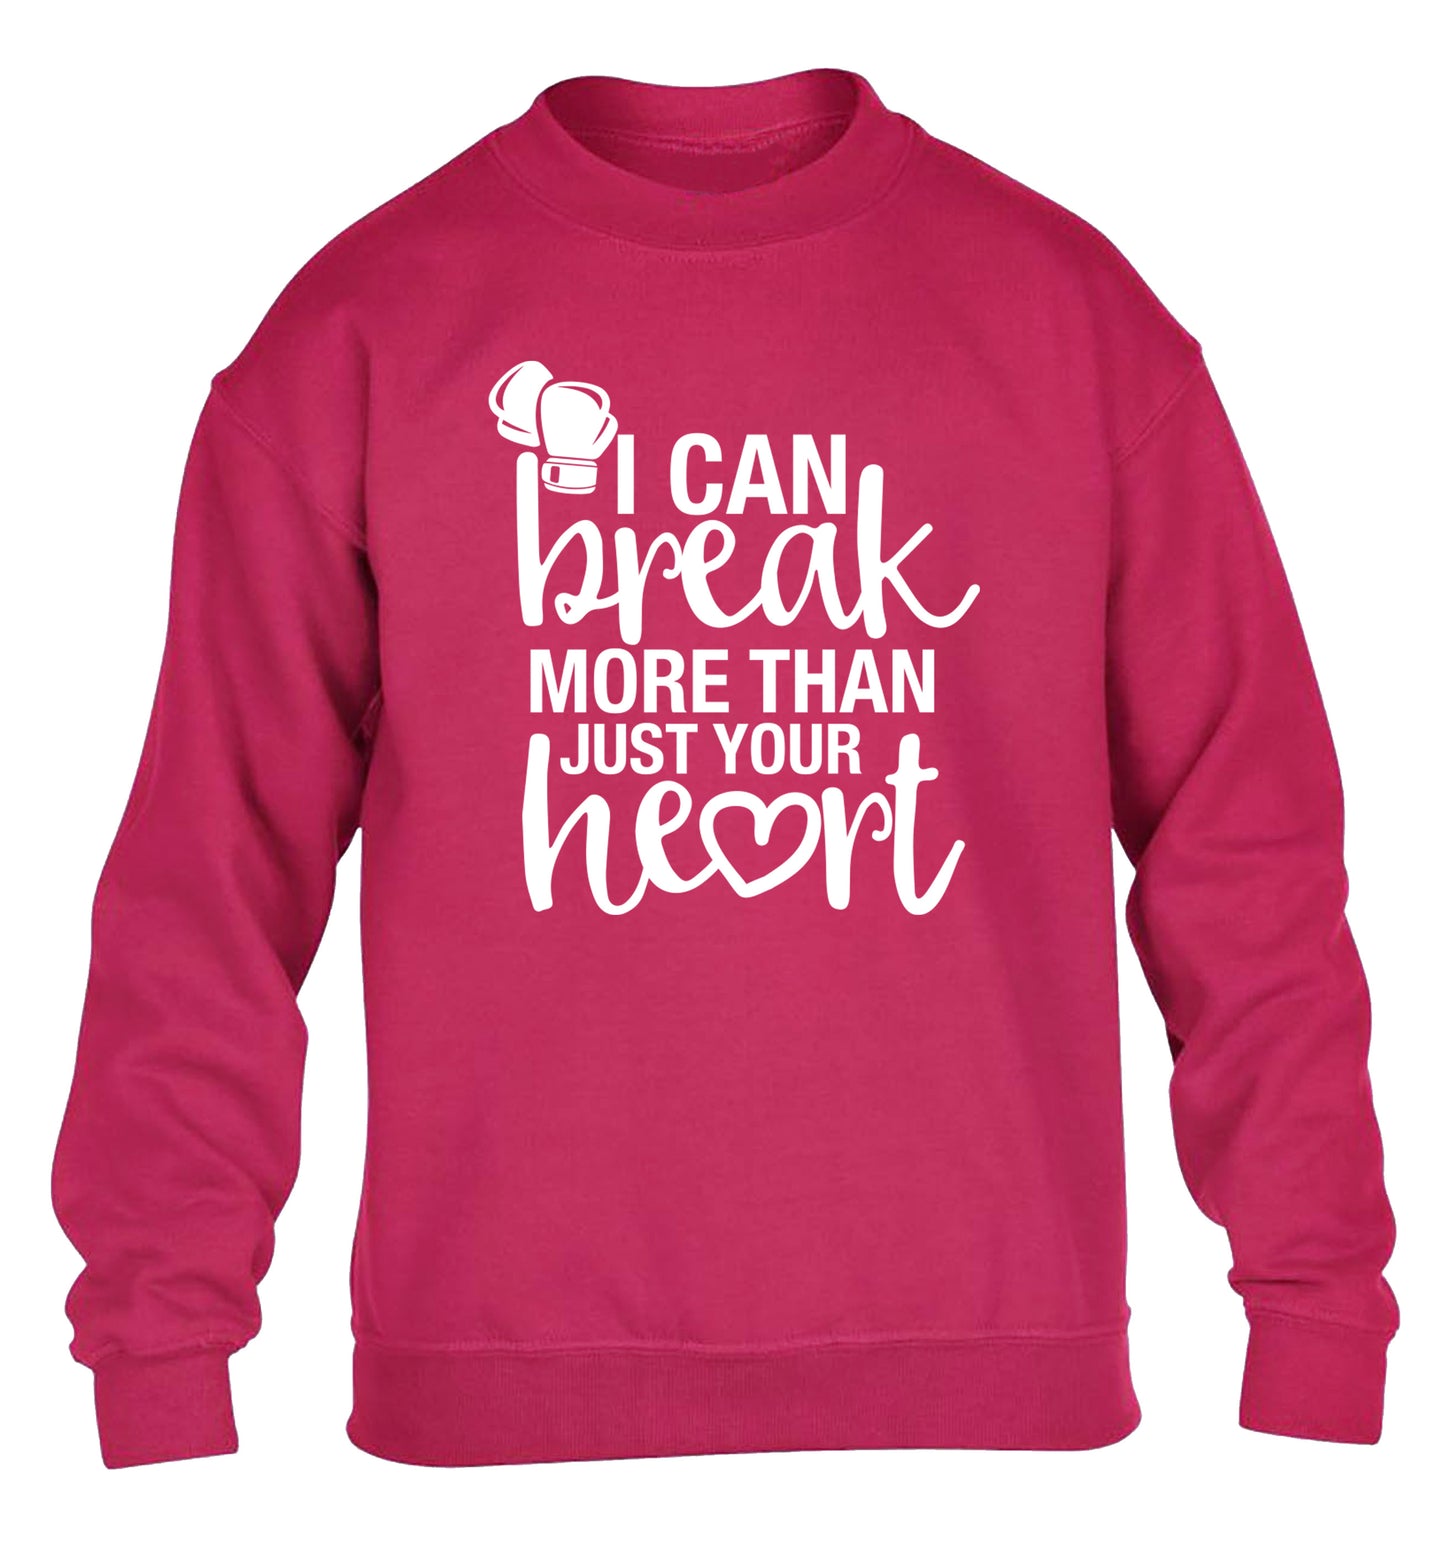 I can break more than just your heart children's pink sweater 12-13 Years